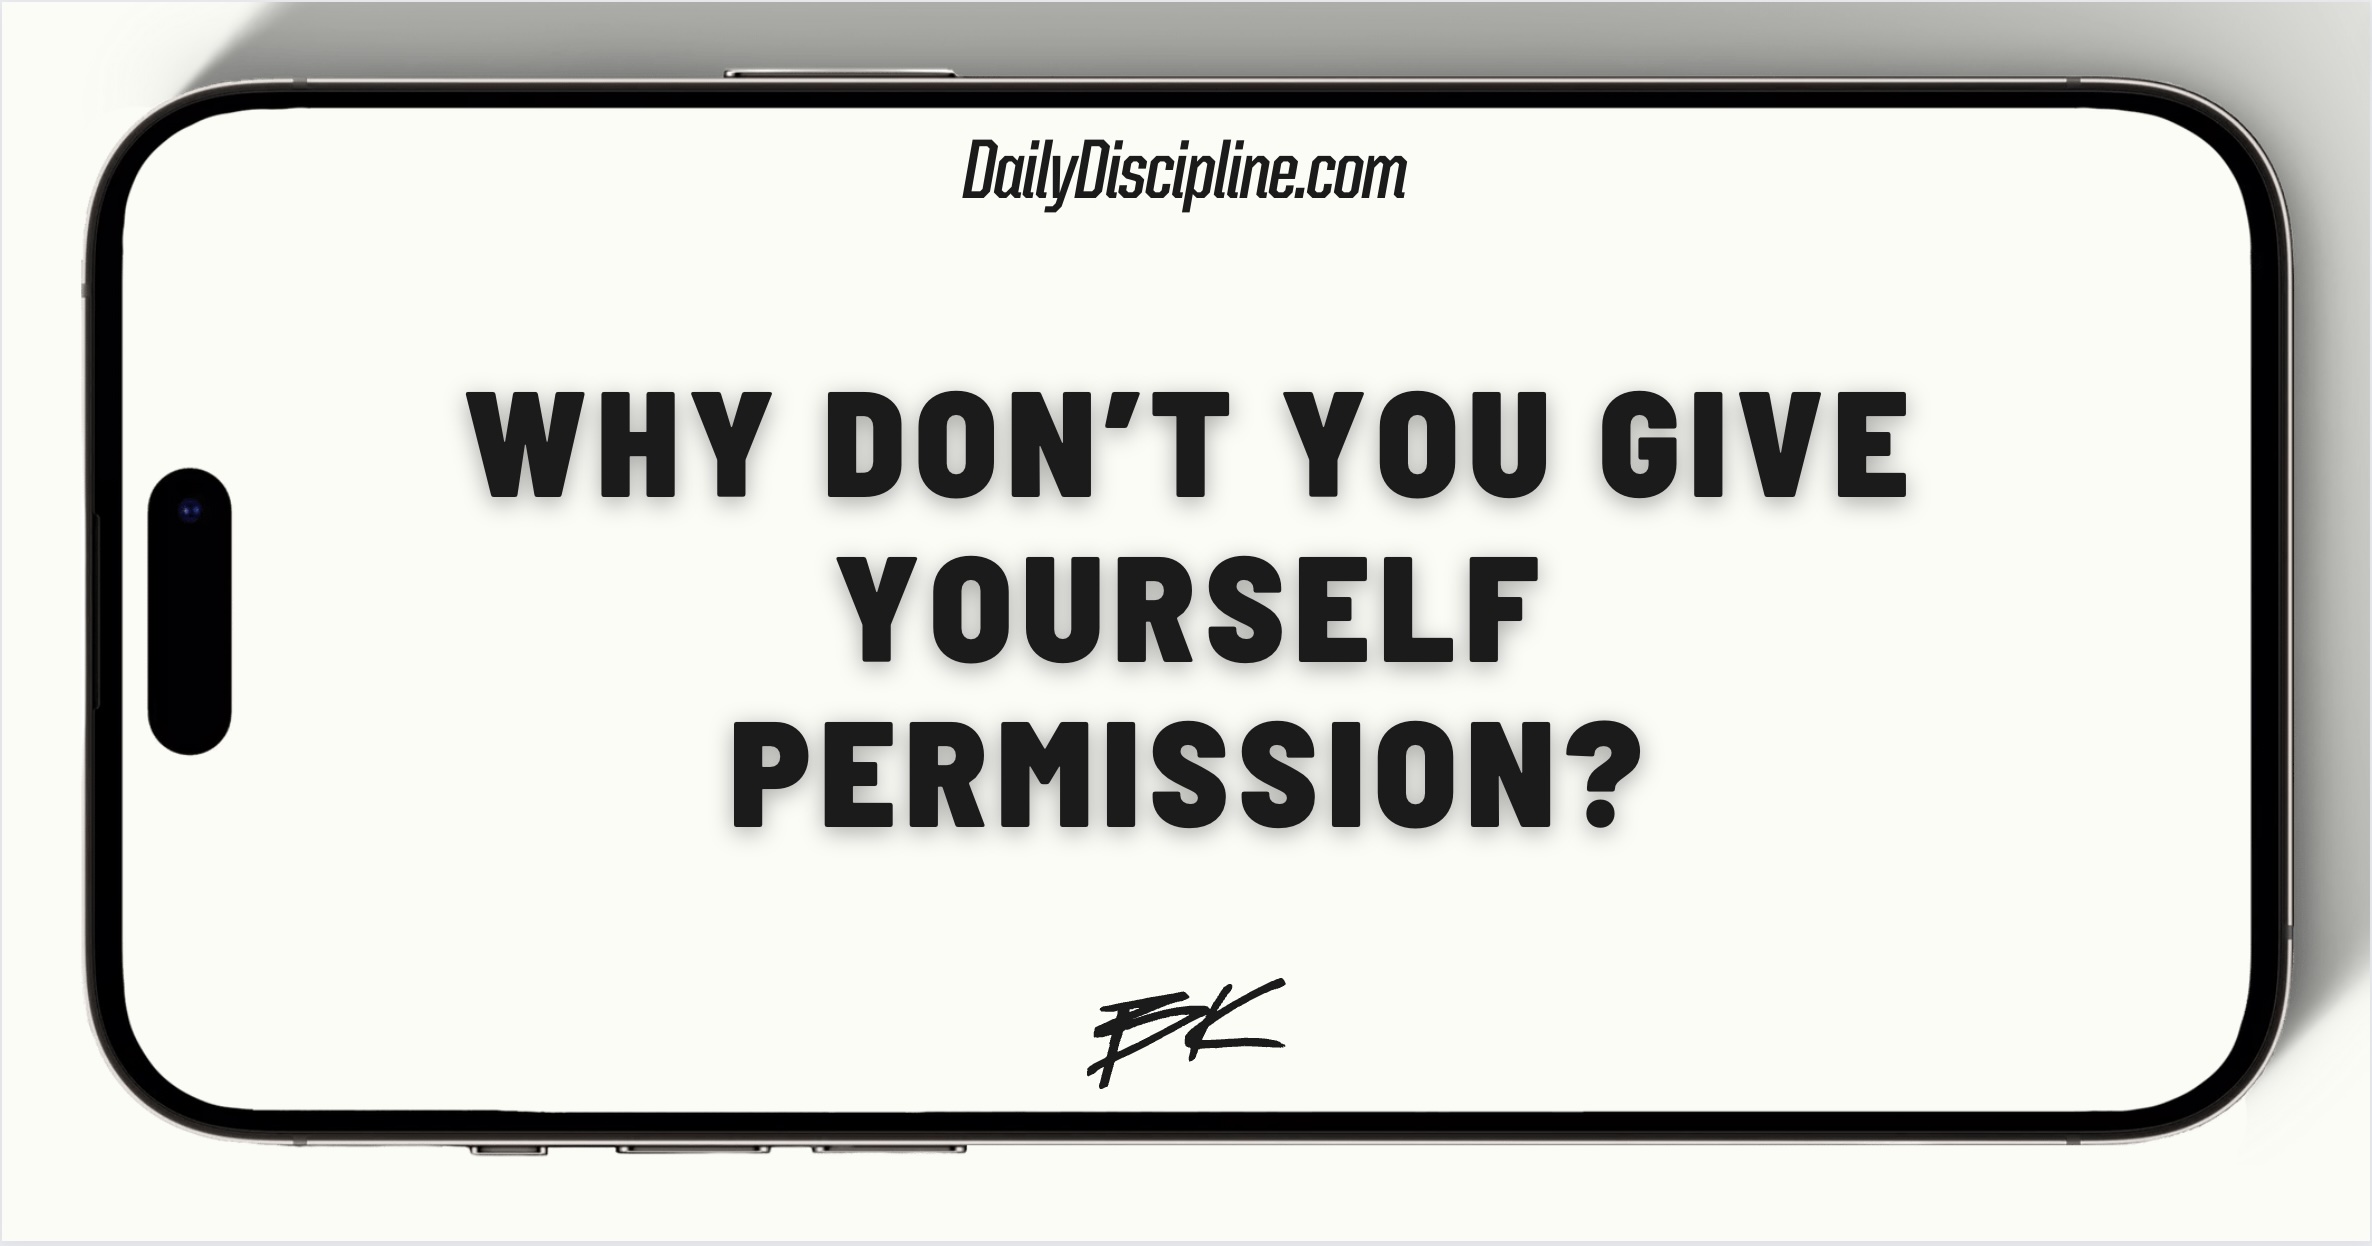 Why don’t you give yourself permission?